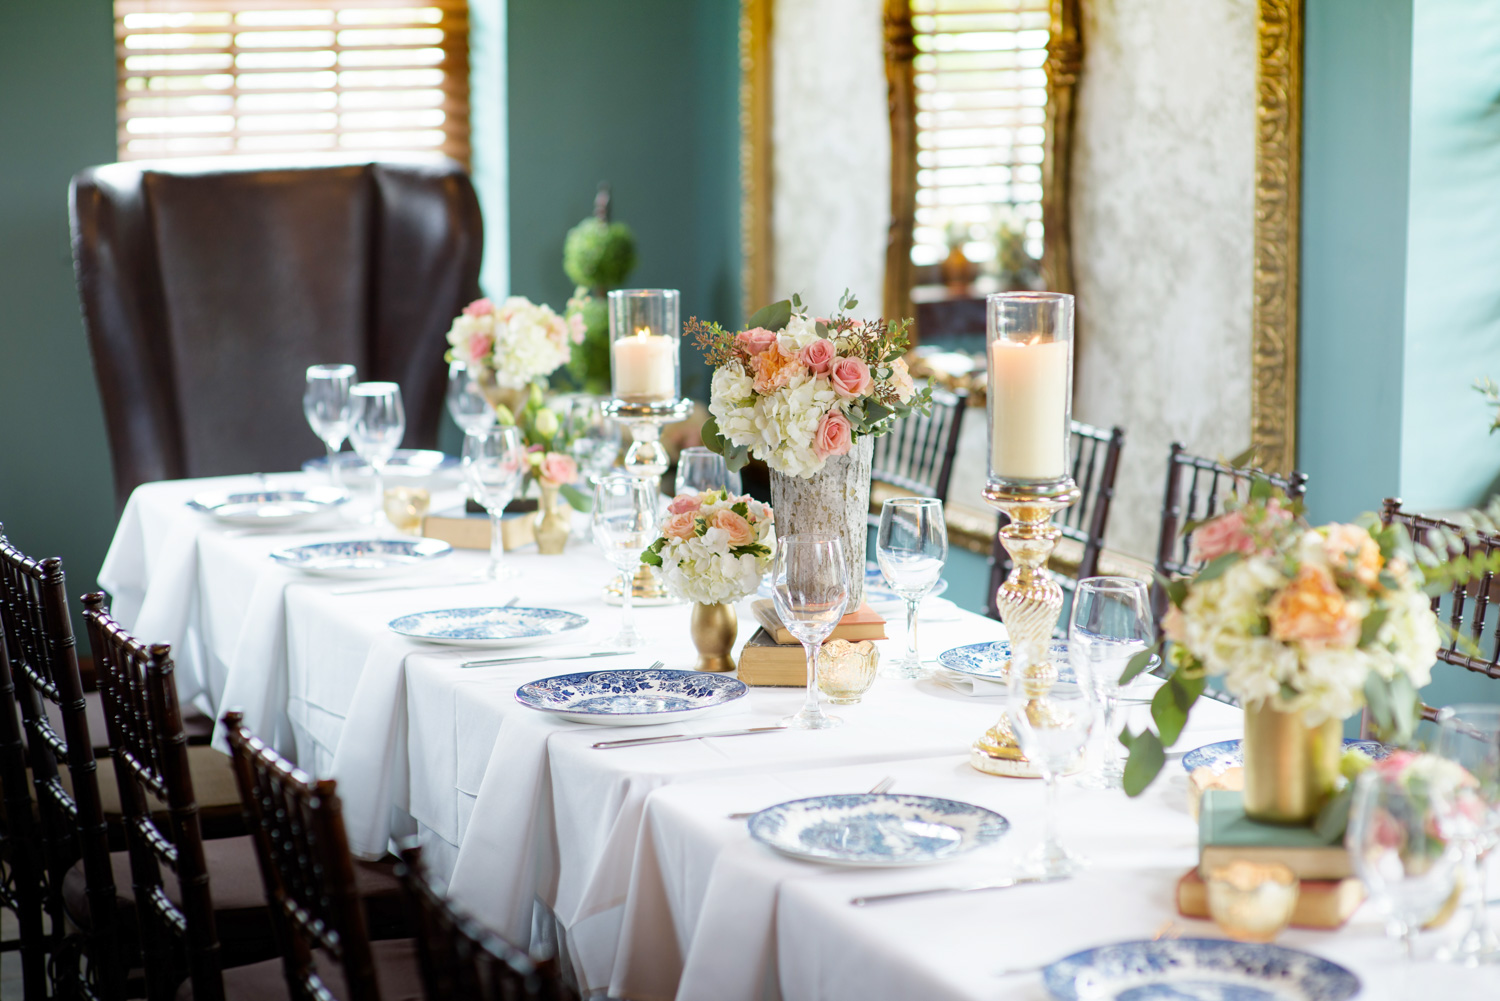 The Tea Room for Private Events